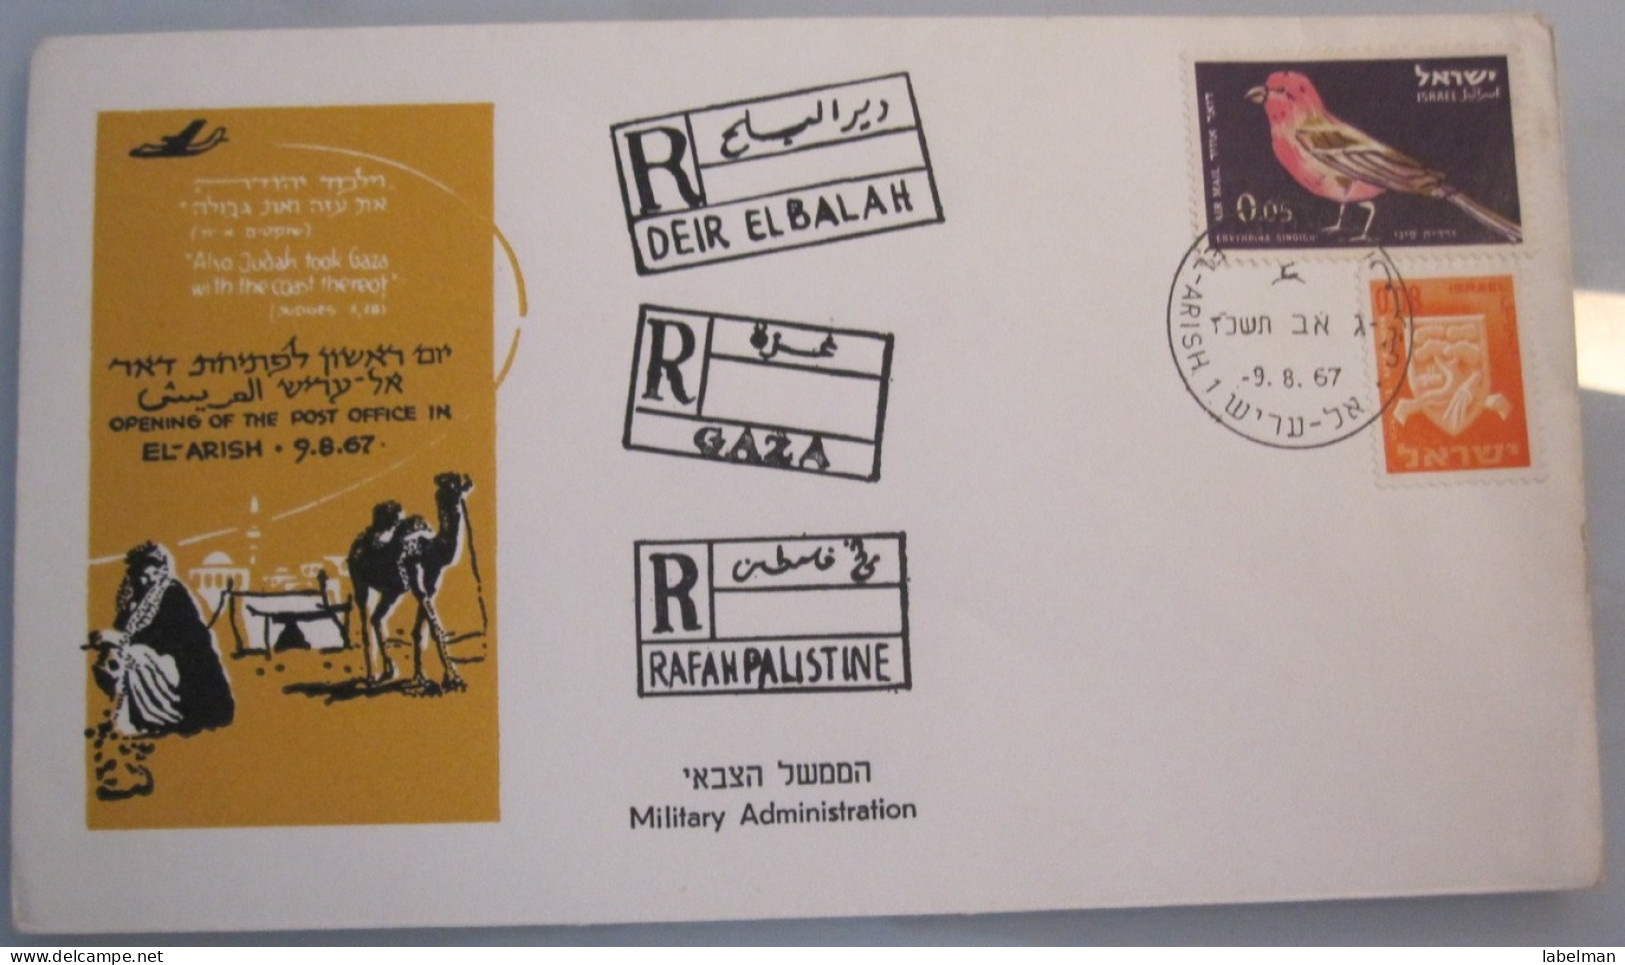 1967 POO FIRST DAY POST OFFICE OPENING MILITARY GOVERNMENT SINAI DESERT EL ARISH EGYPT 6 DAYS WAR COVER ISRAEL CACHET - Covers & Documents